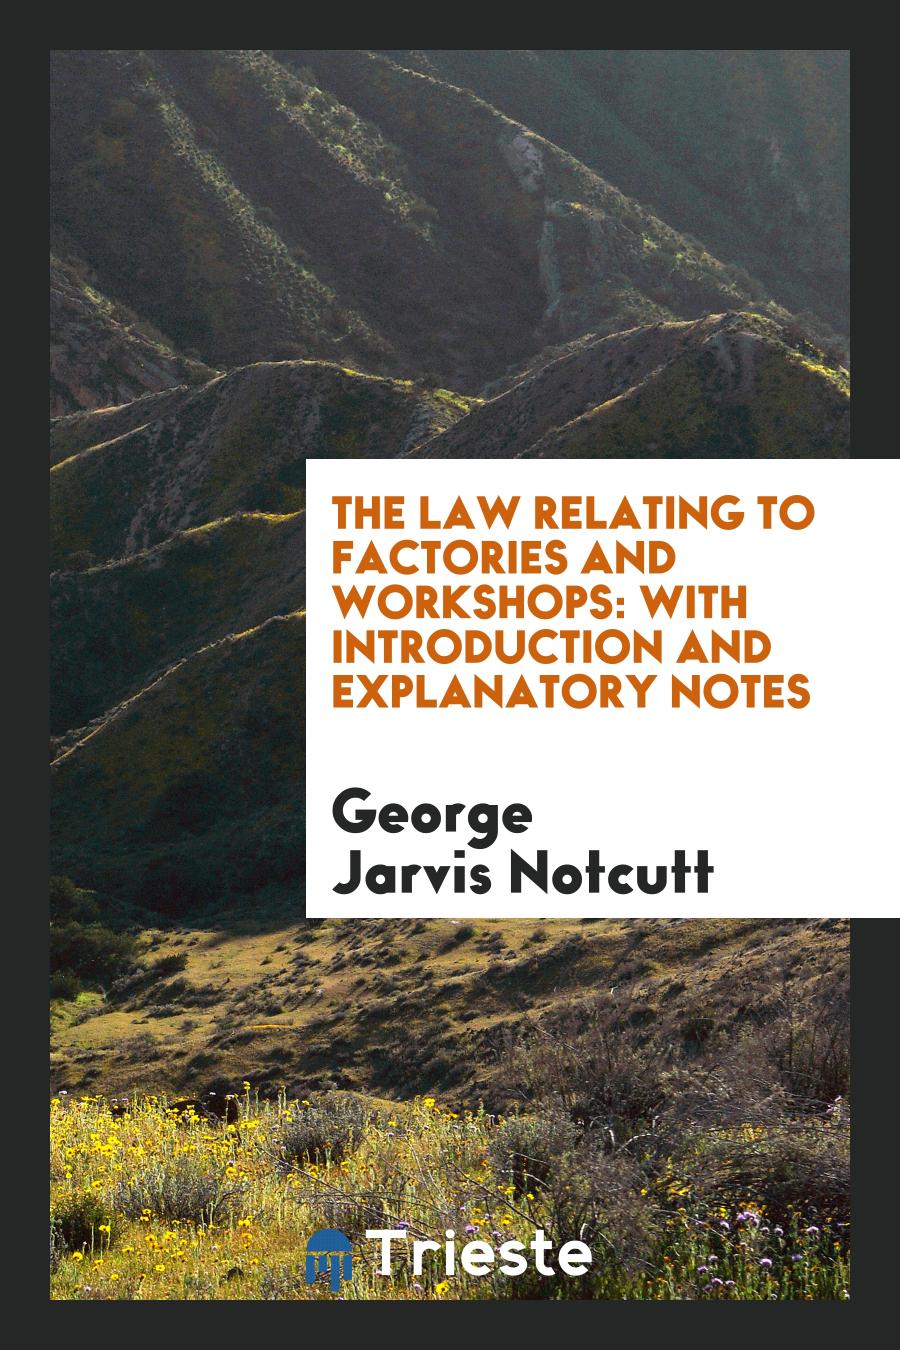 The Law Relating to Factories and Workshops: With Introduction and Explanatory Notes